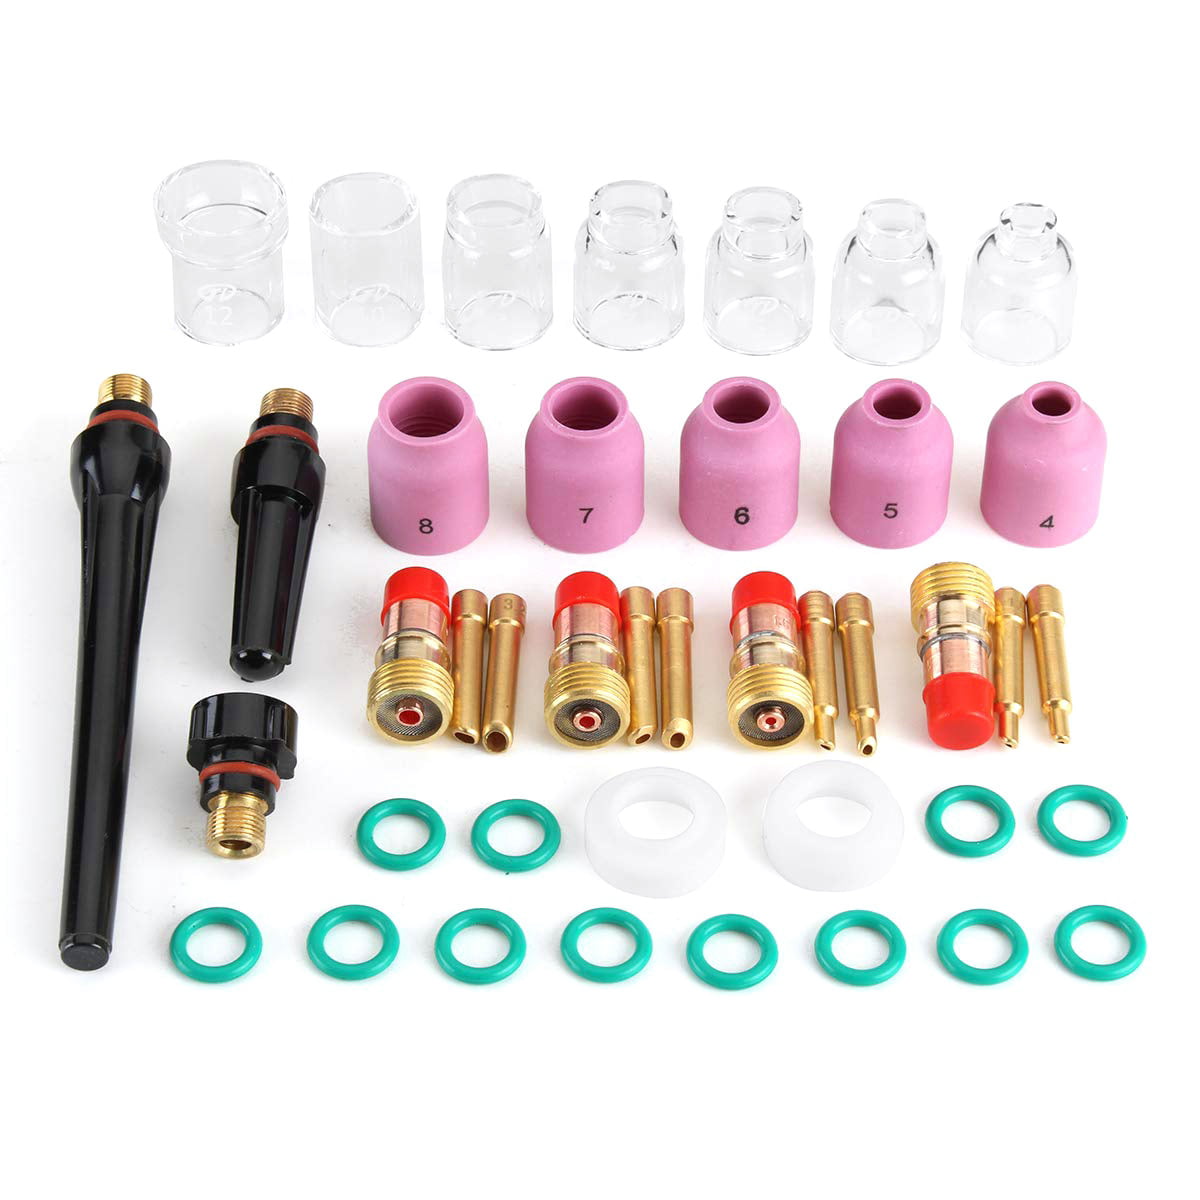 41Pcs/Lot TIG Welding Torch Nozzle Ring Cover Lens Glass Kit for WP17/18/26 Welding Accessories Kit Set -